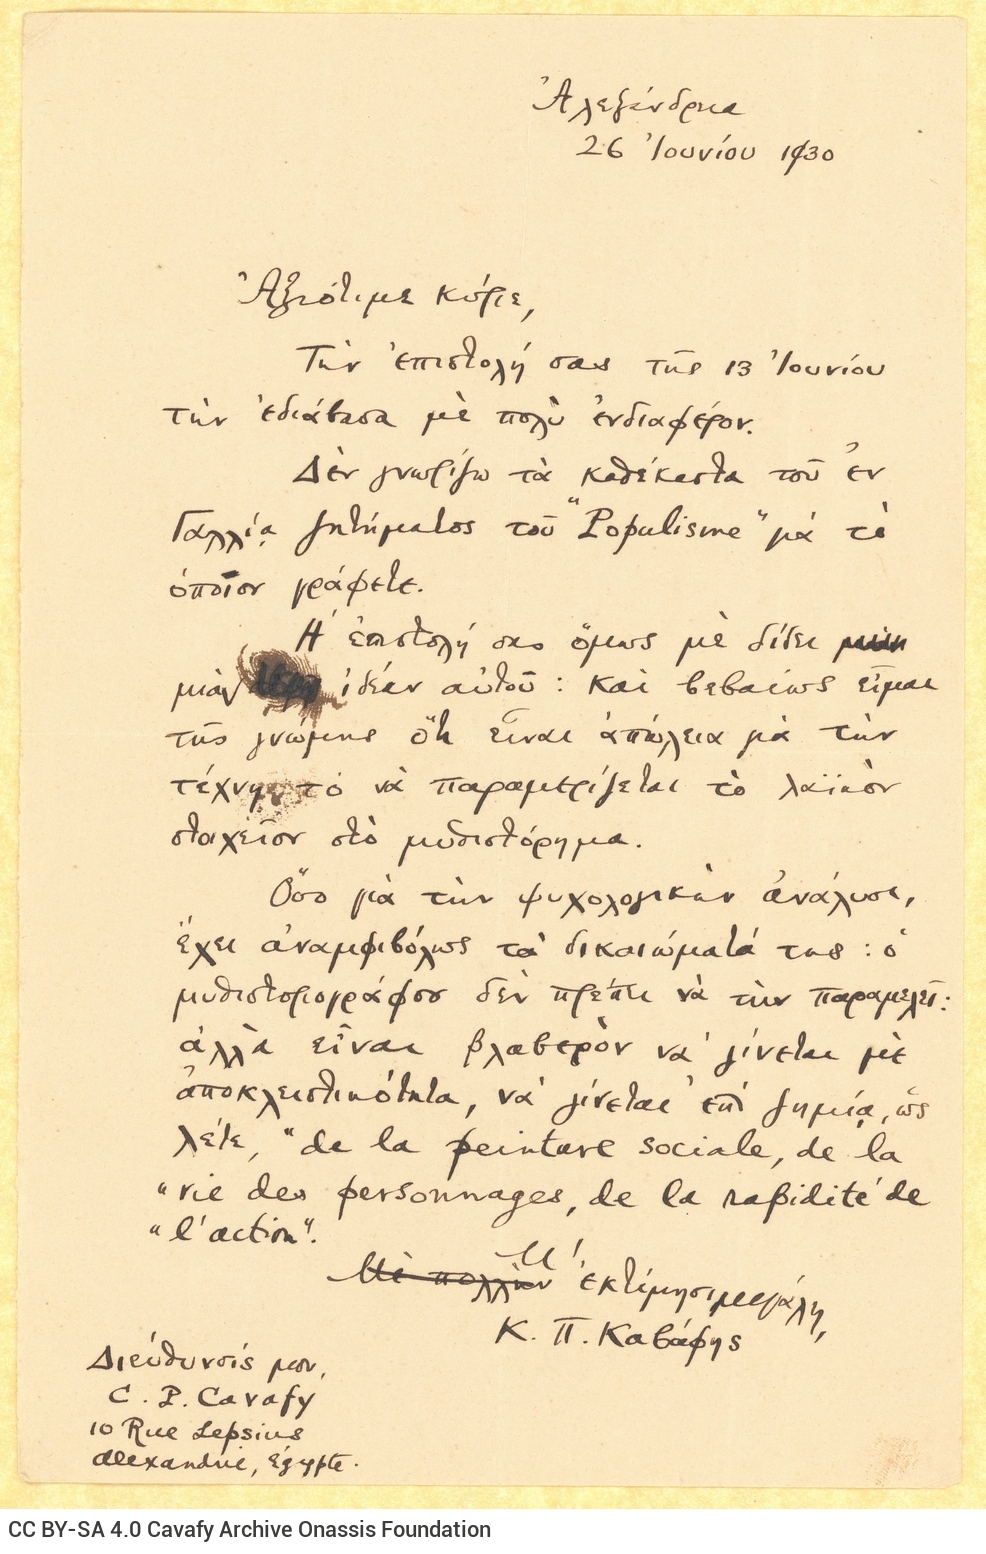 Handwritten copy of a letter to an unknown recipient on one side of a sheet. Cavafy's signature and address at the bottom of 